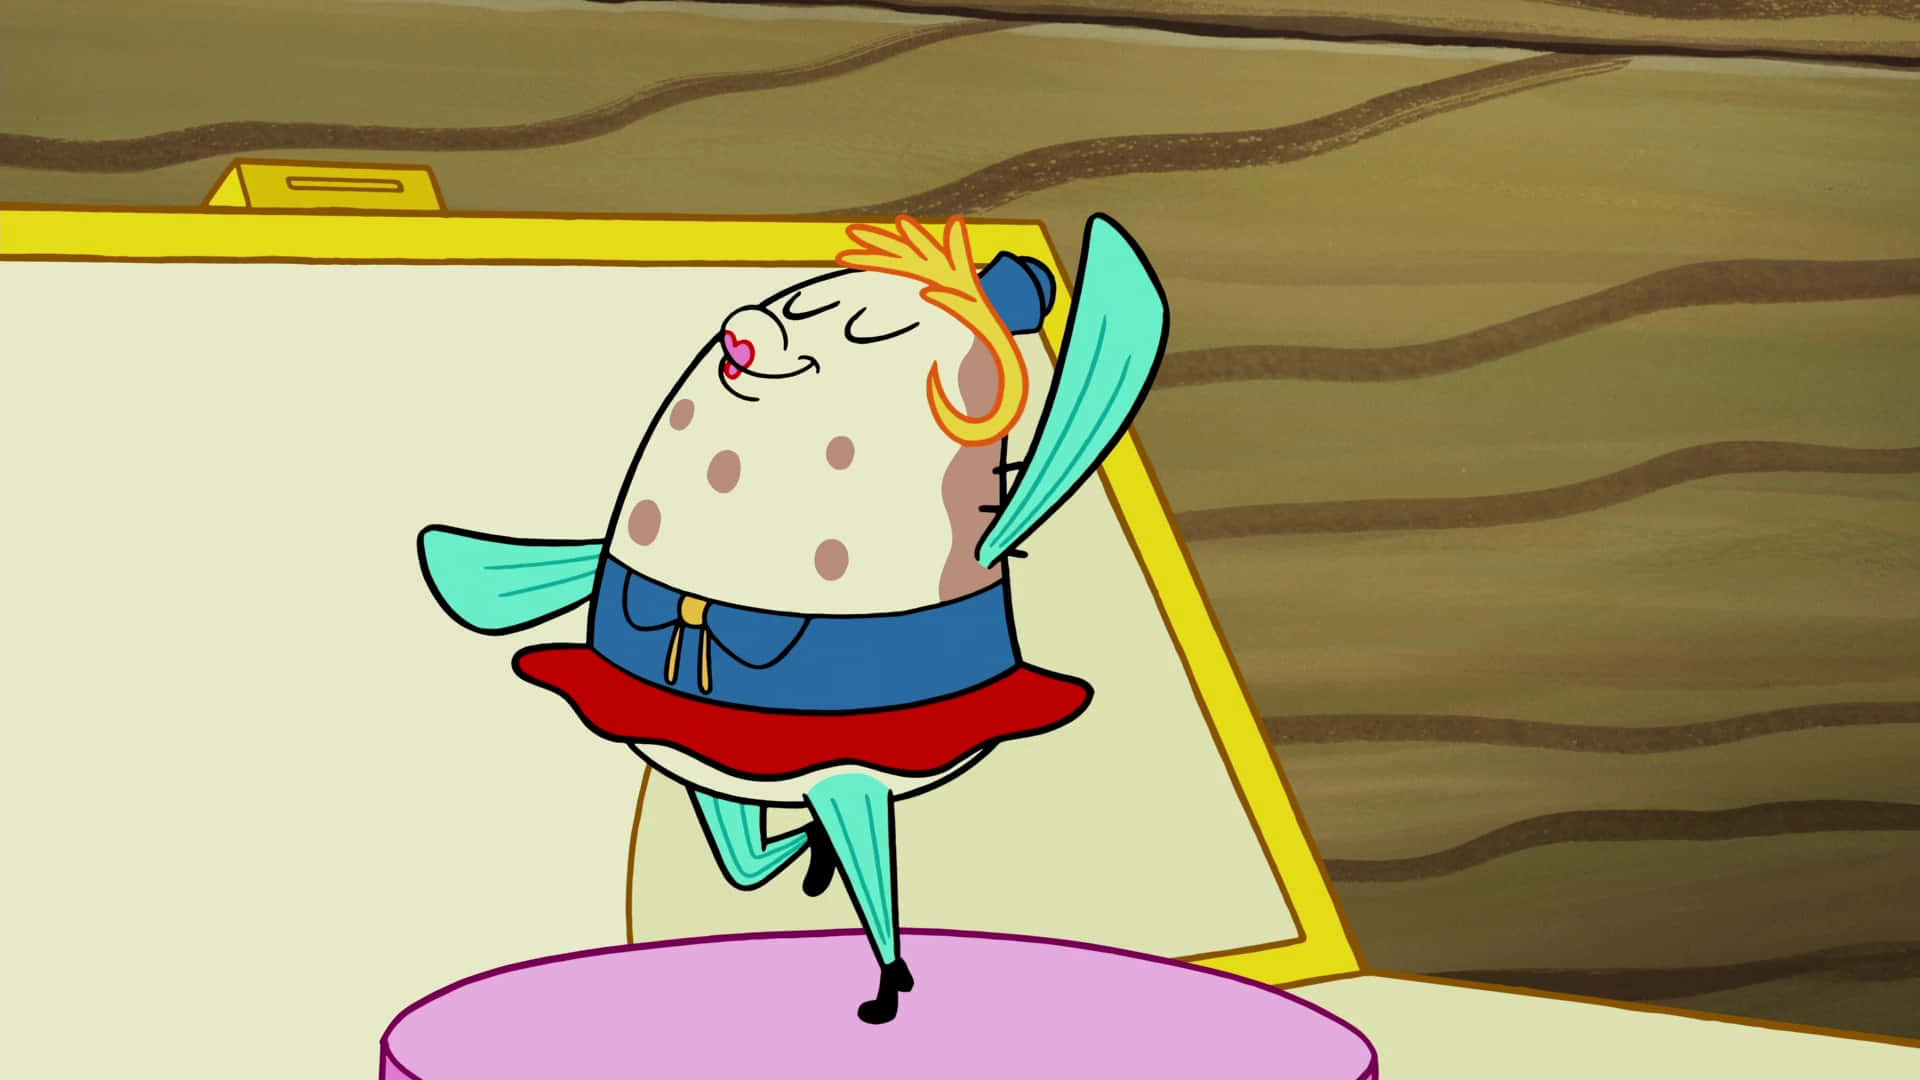 Mrs. Puff Smiling and Teaching in Boating School Wallpaper